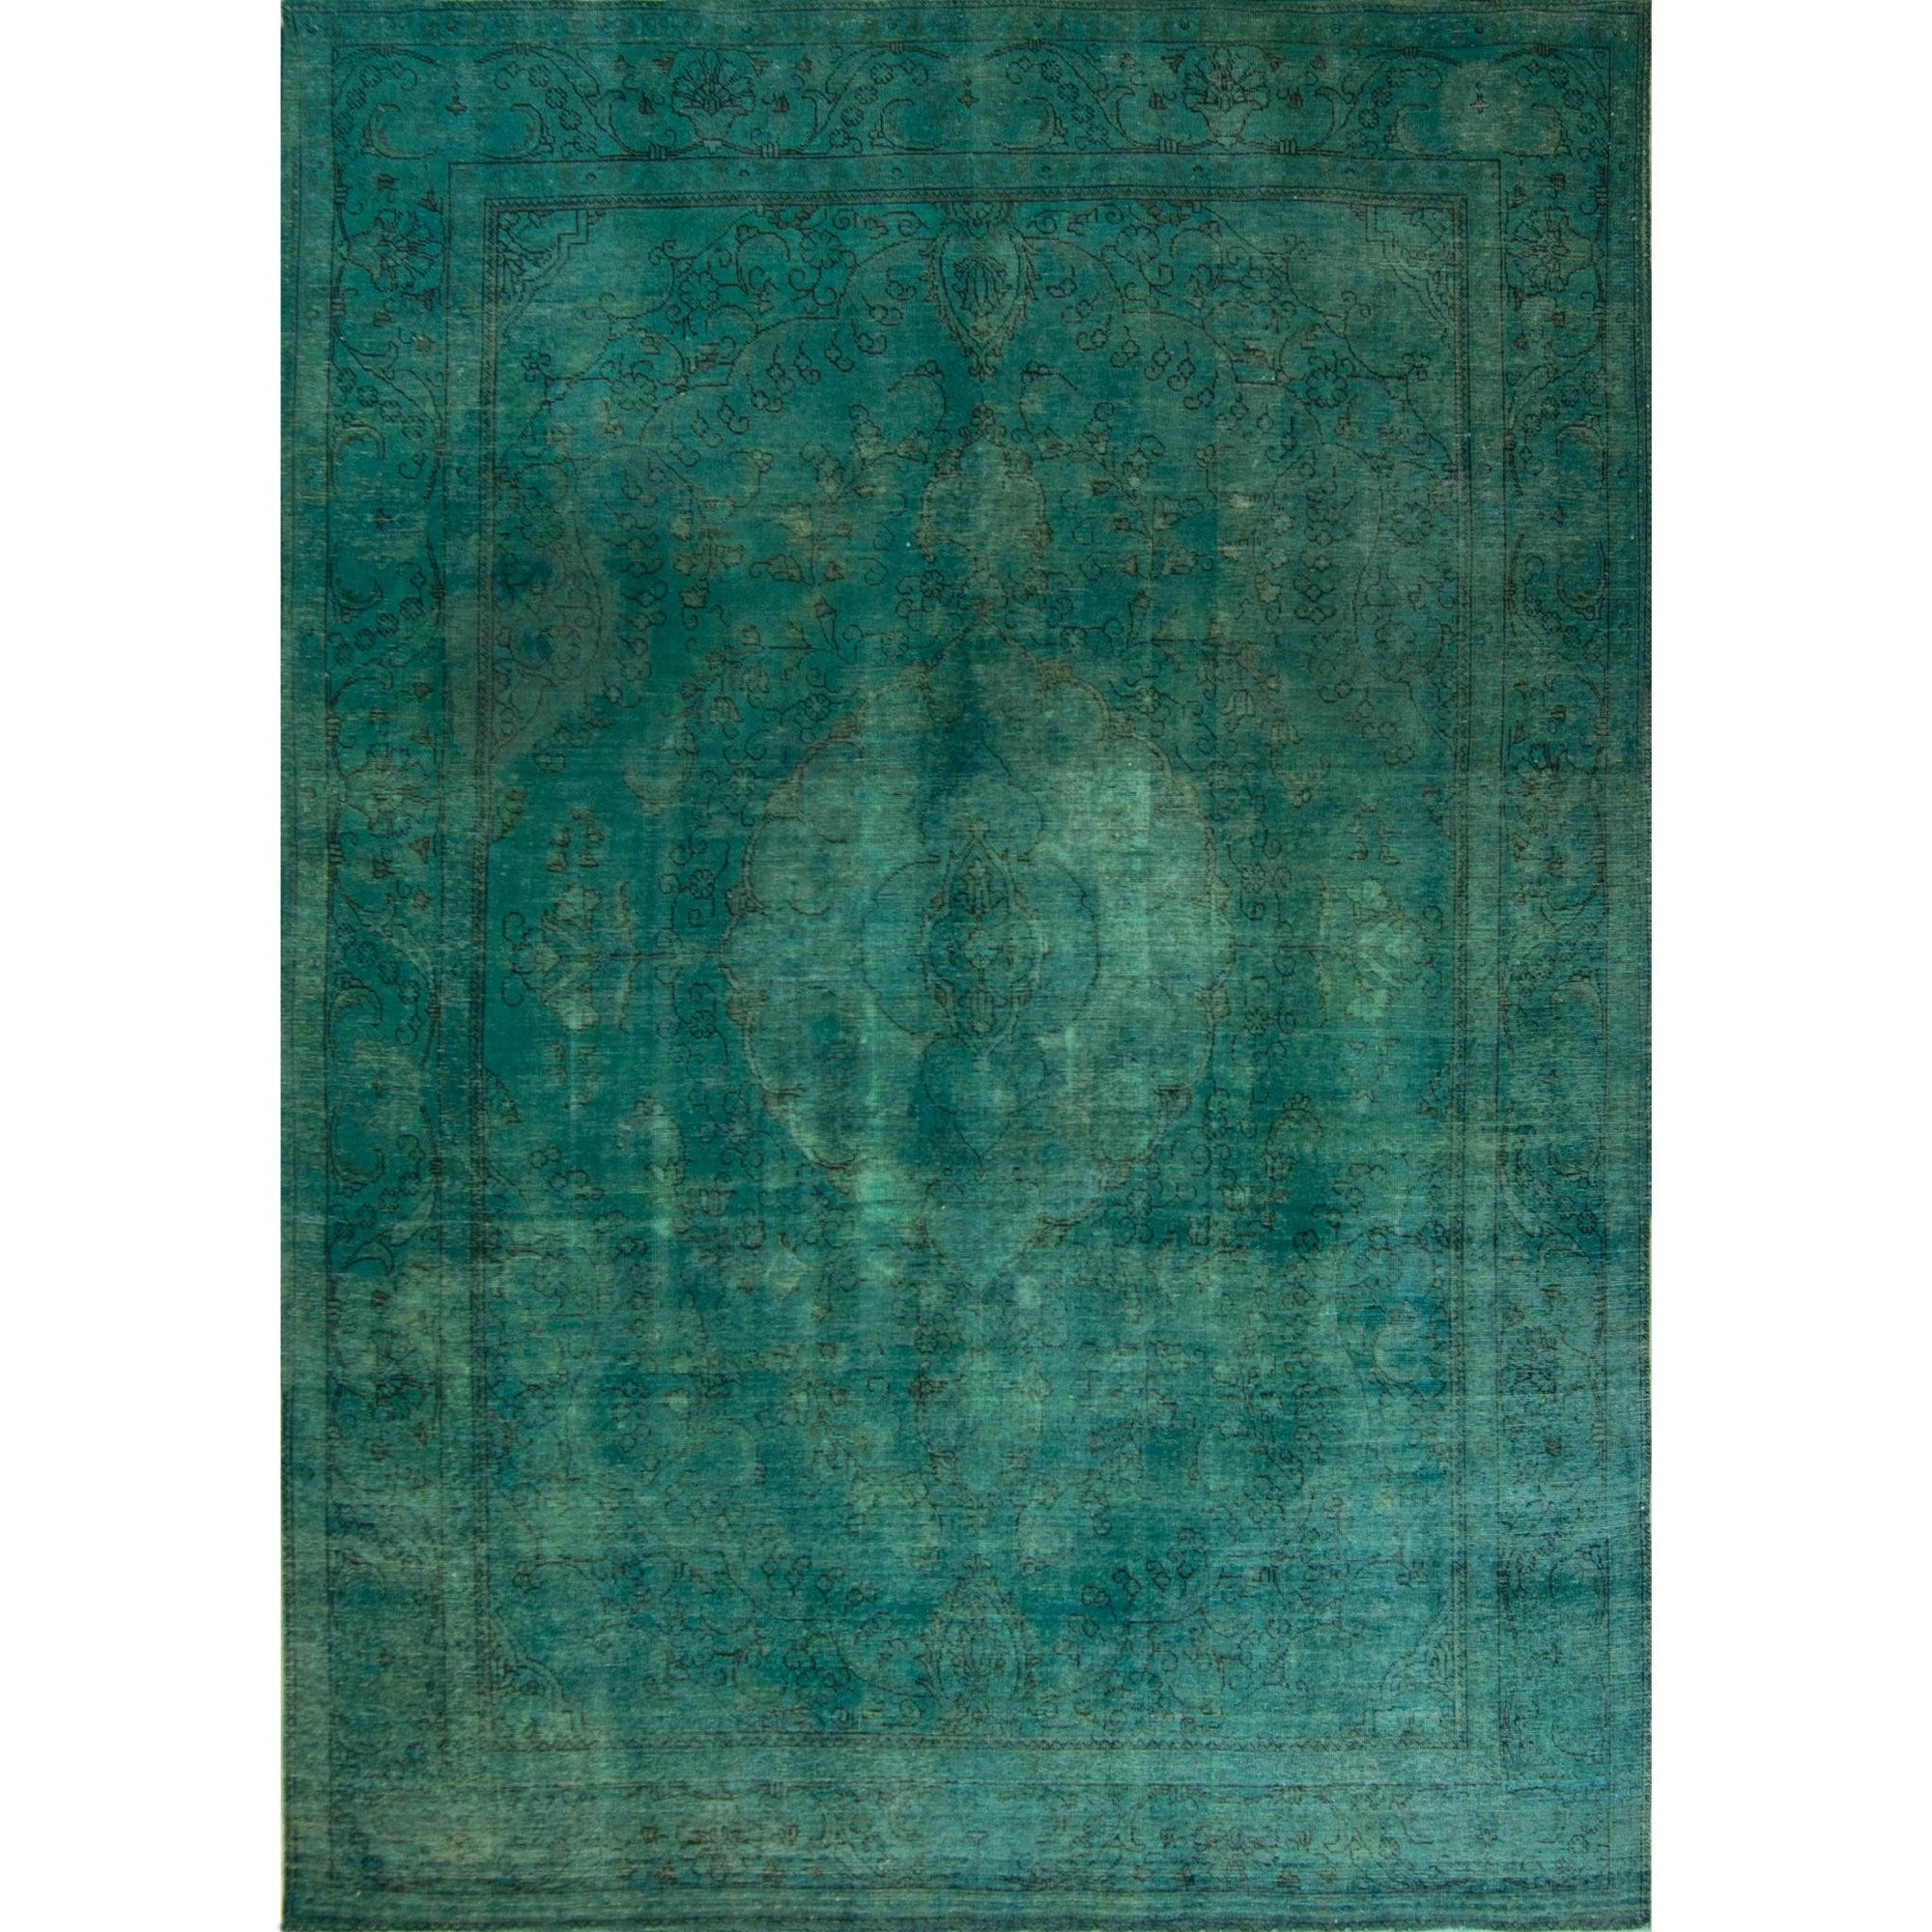 Hand-knotted Over Dyed Modern Rug 244cm x 347cm